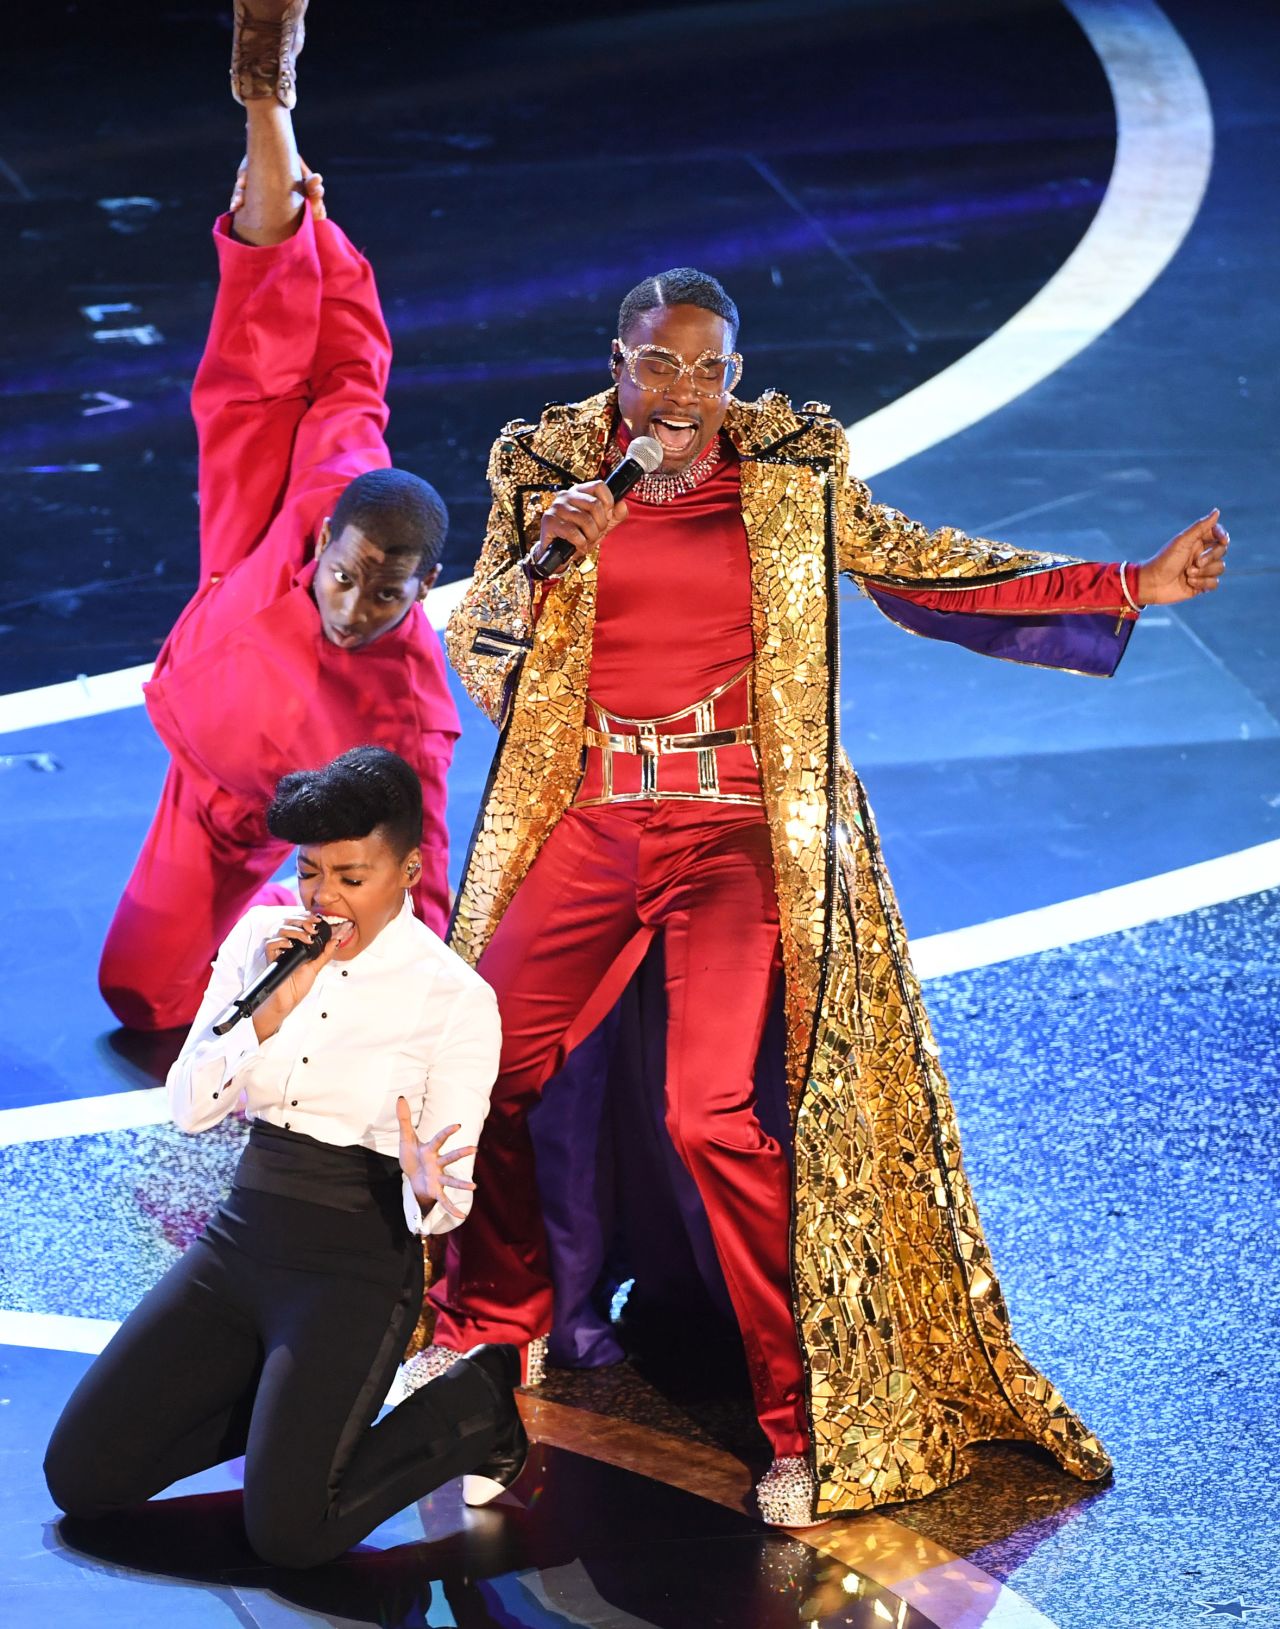 Billy Porter and Janelle Monáe perform at the Oscars